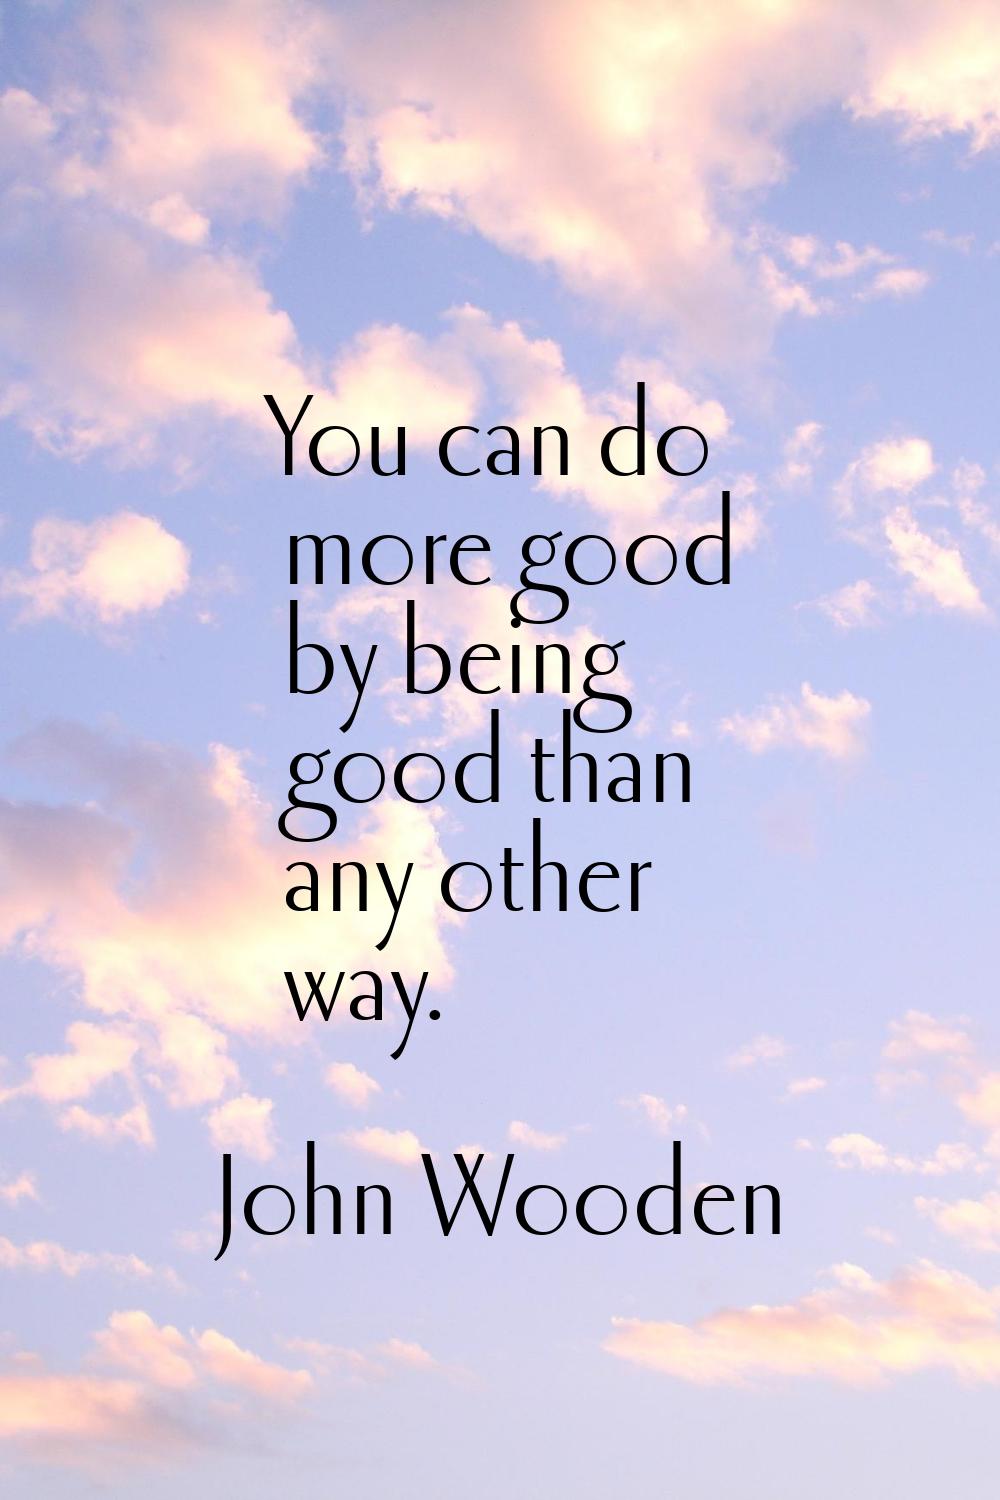 You can do more good by being good than any other way.